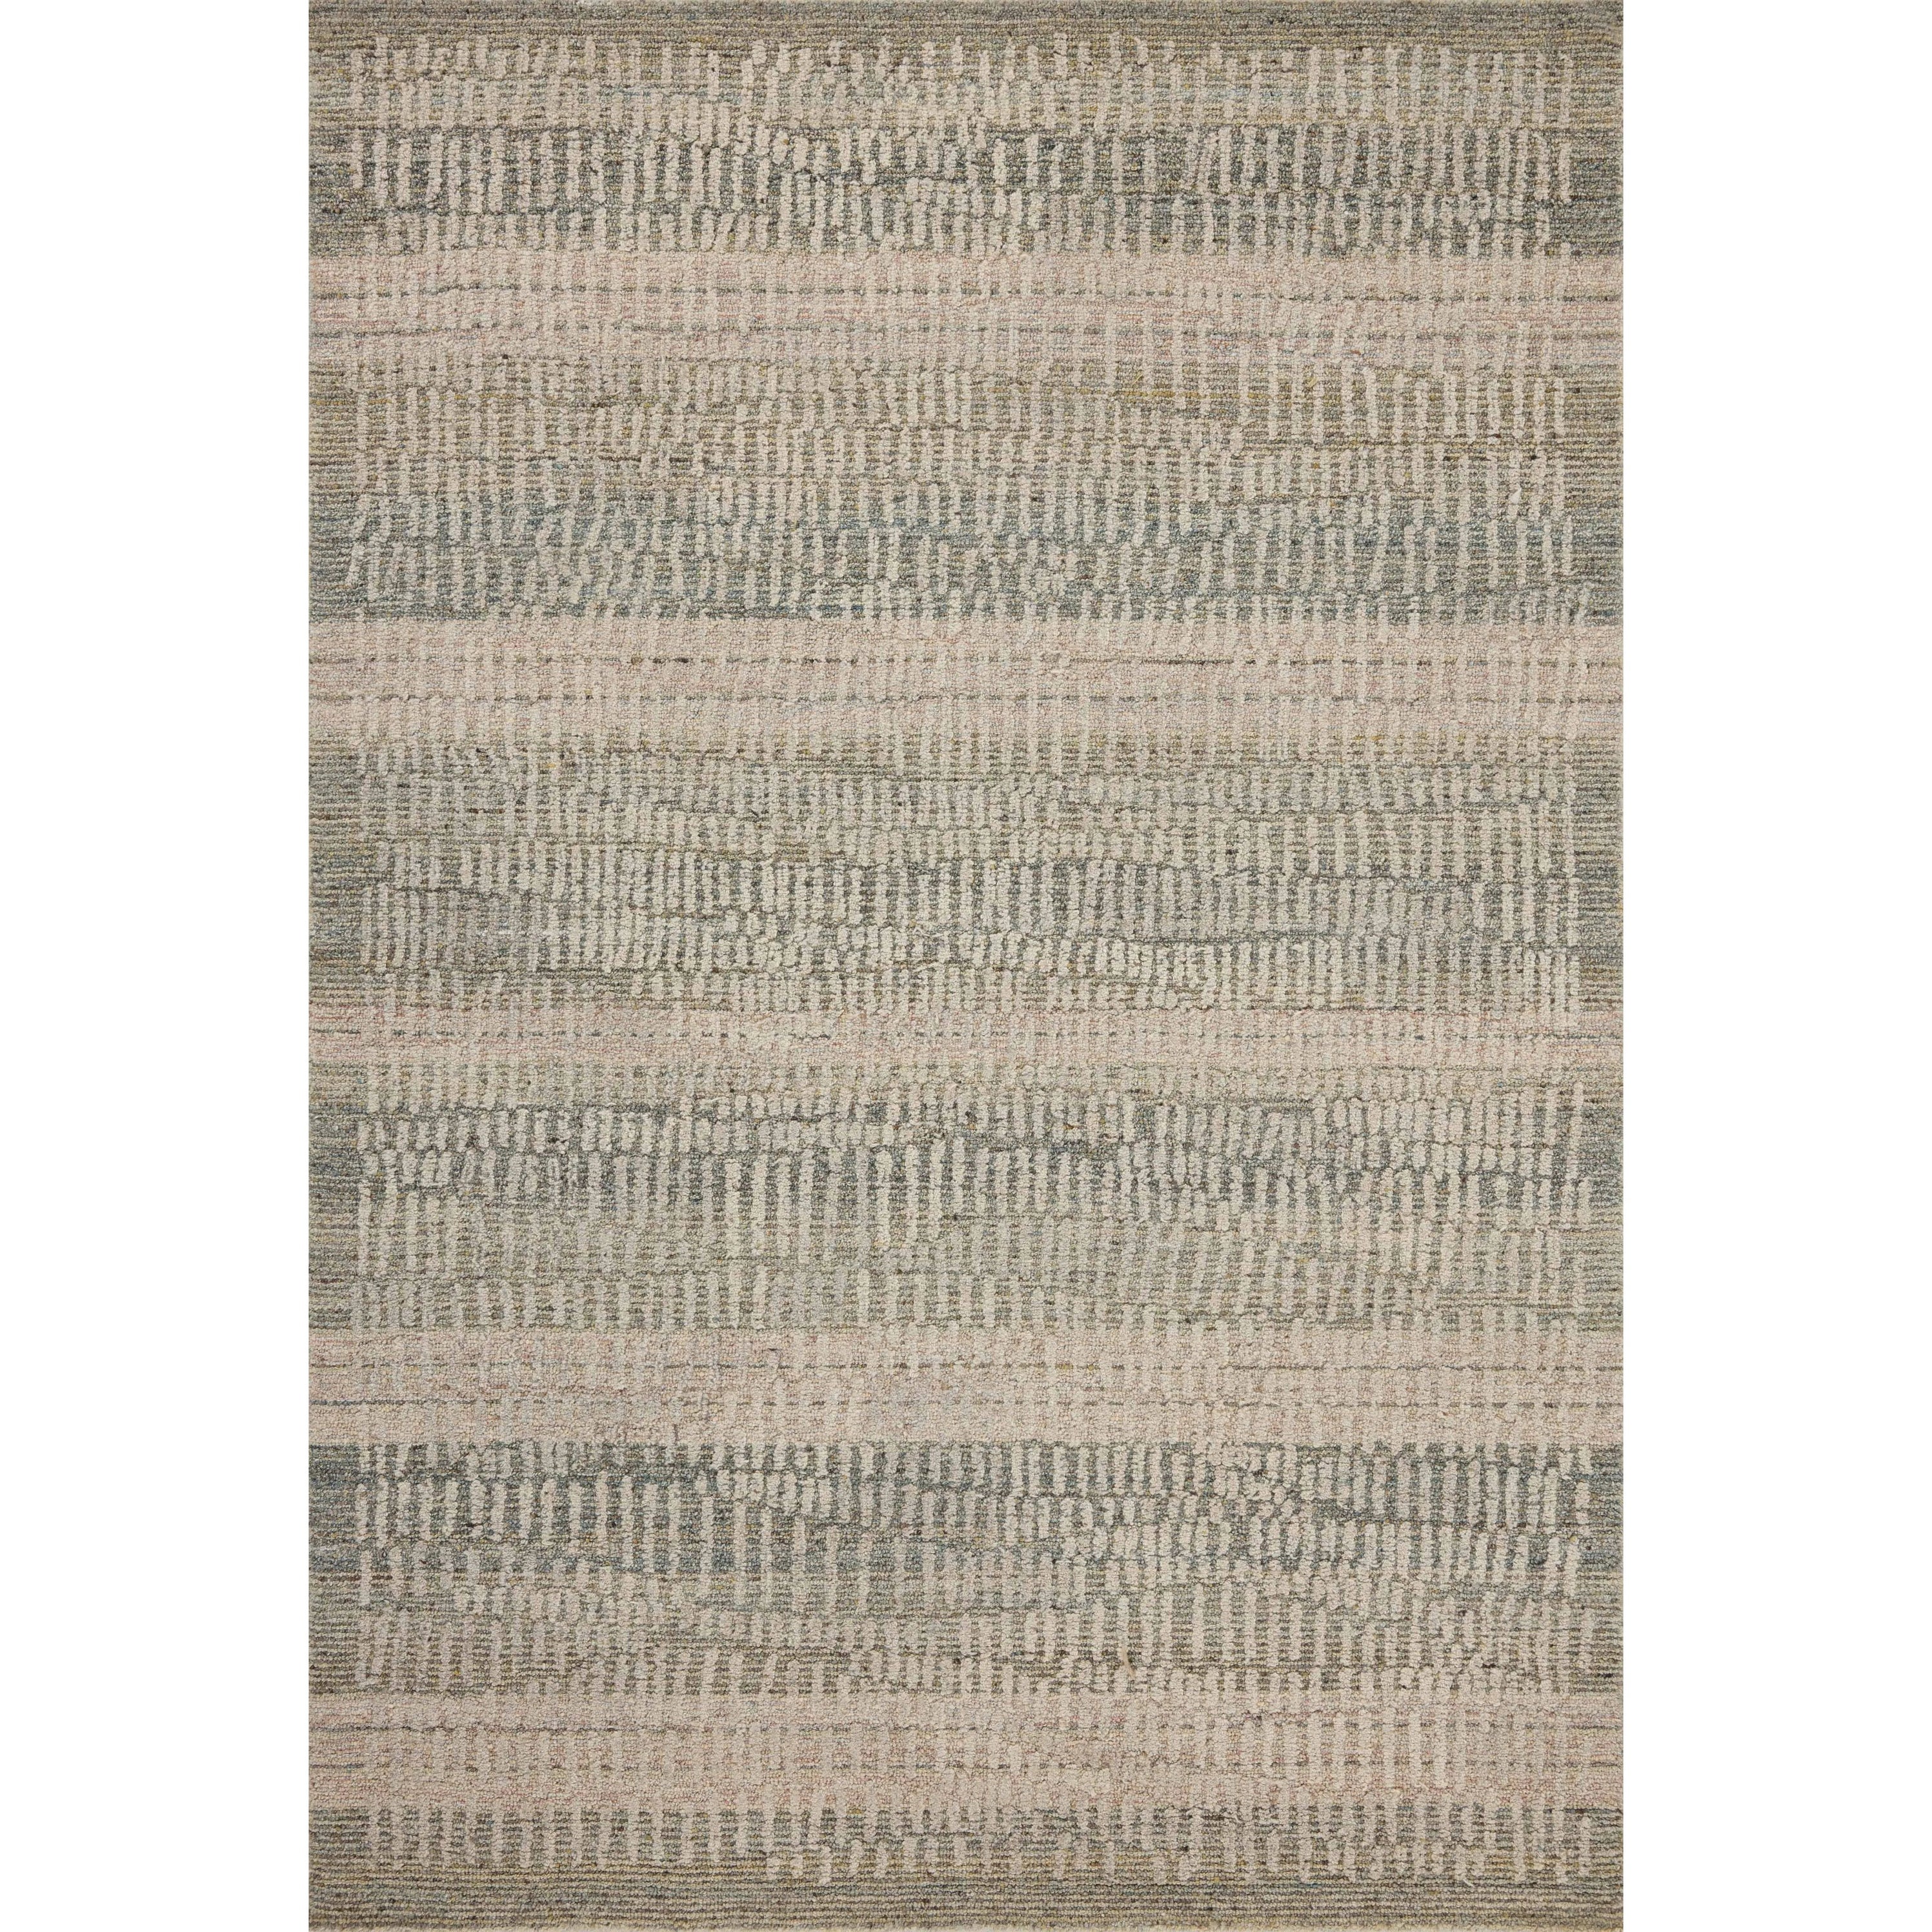 The Elias Earth / Blush Rug is a hand-tufted wool area rug with lively graphic patterns in earth and stone tones. There’s a unique texture to the rug made by over-tufting, in which a design is hand-tufted over a tufted base, creating a subtle high-low pile. Amethyst Home provides interior design, new home construction design consulting, vintage area rugs, and lighting in the Park City metro area.